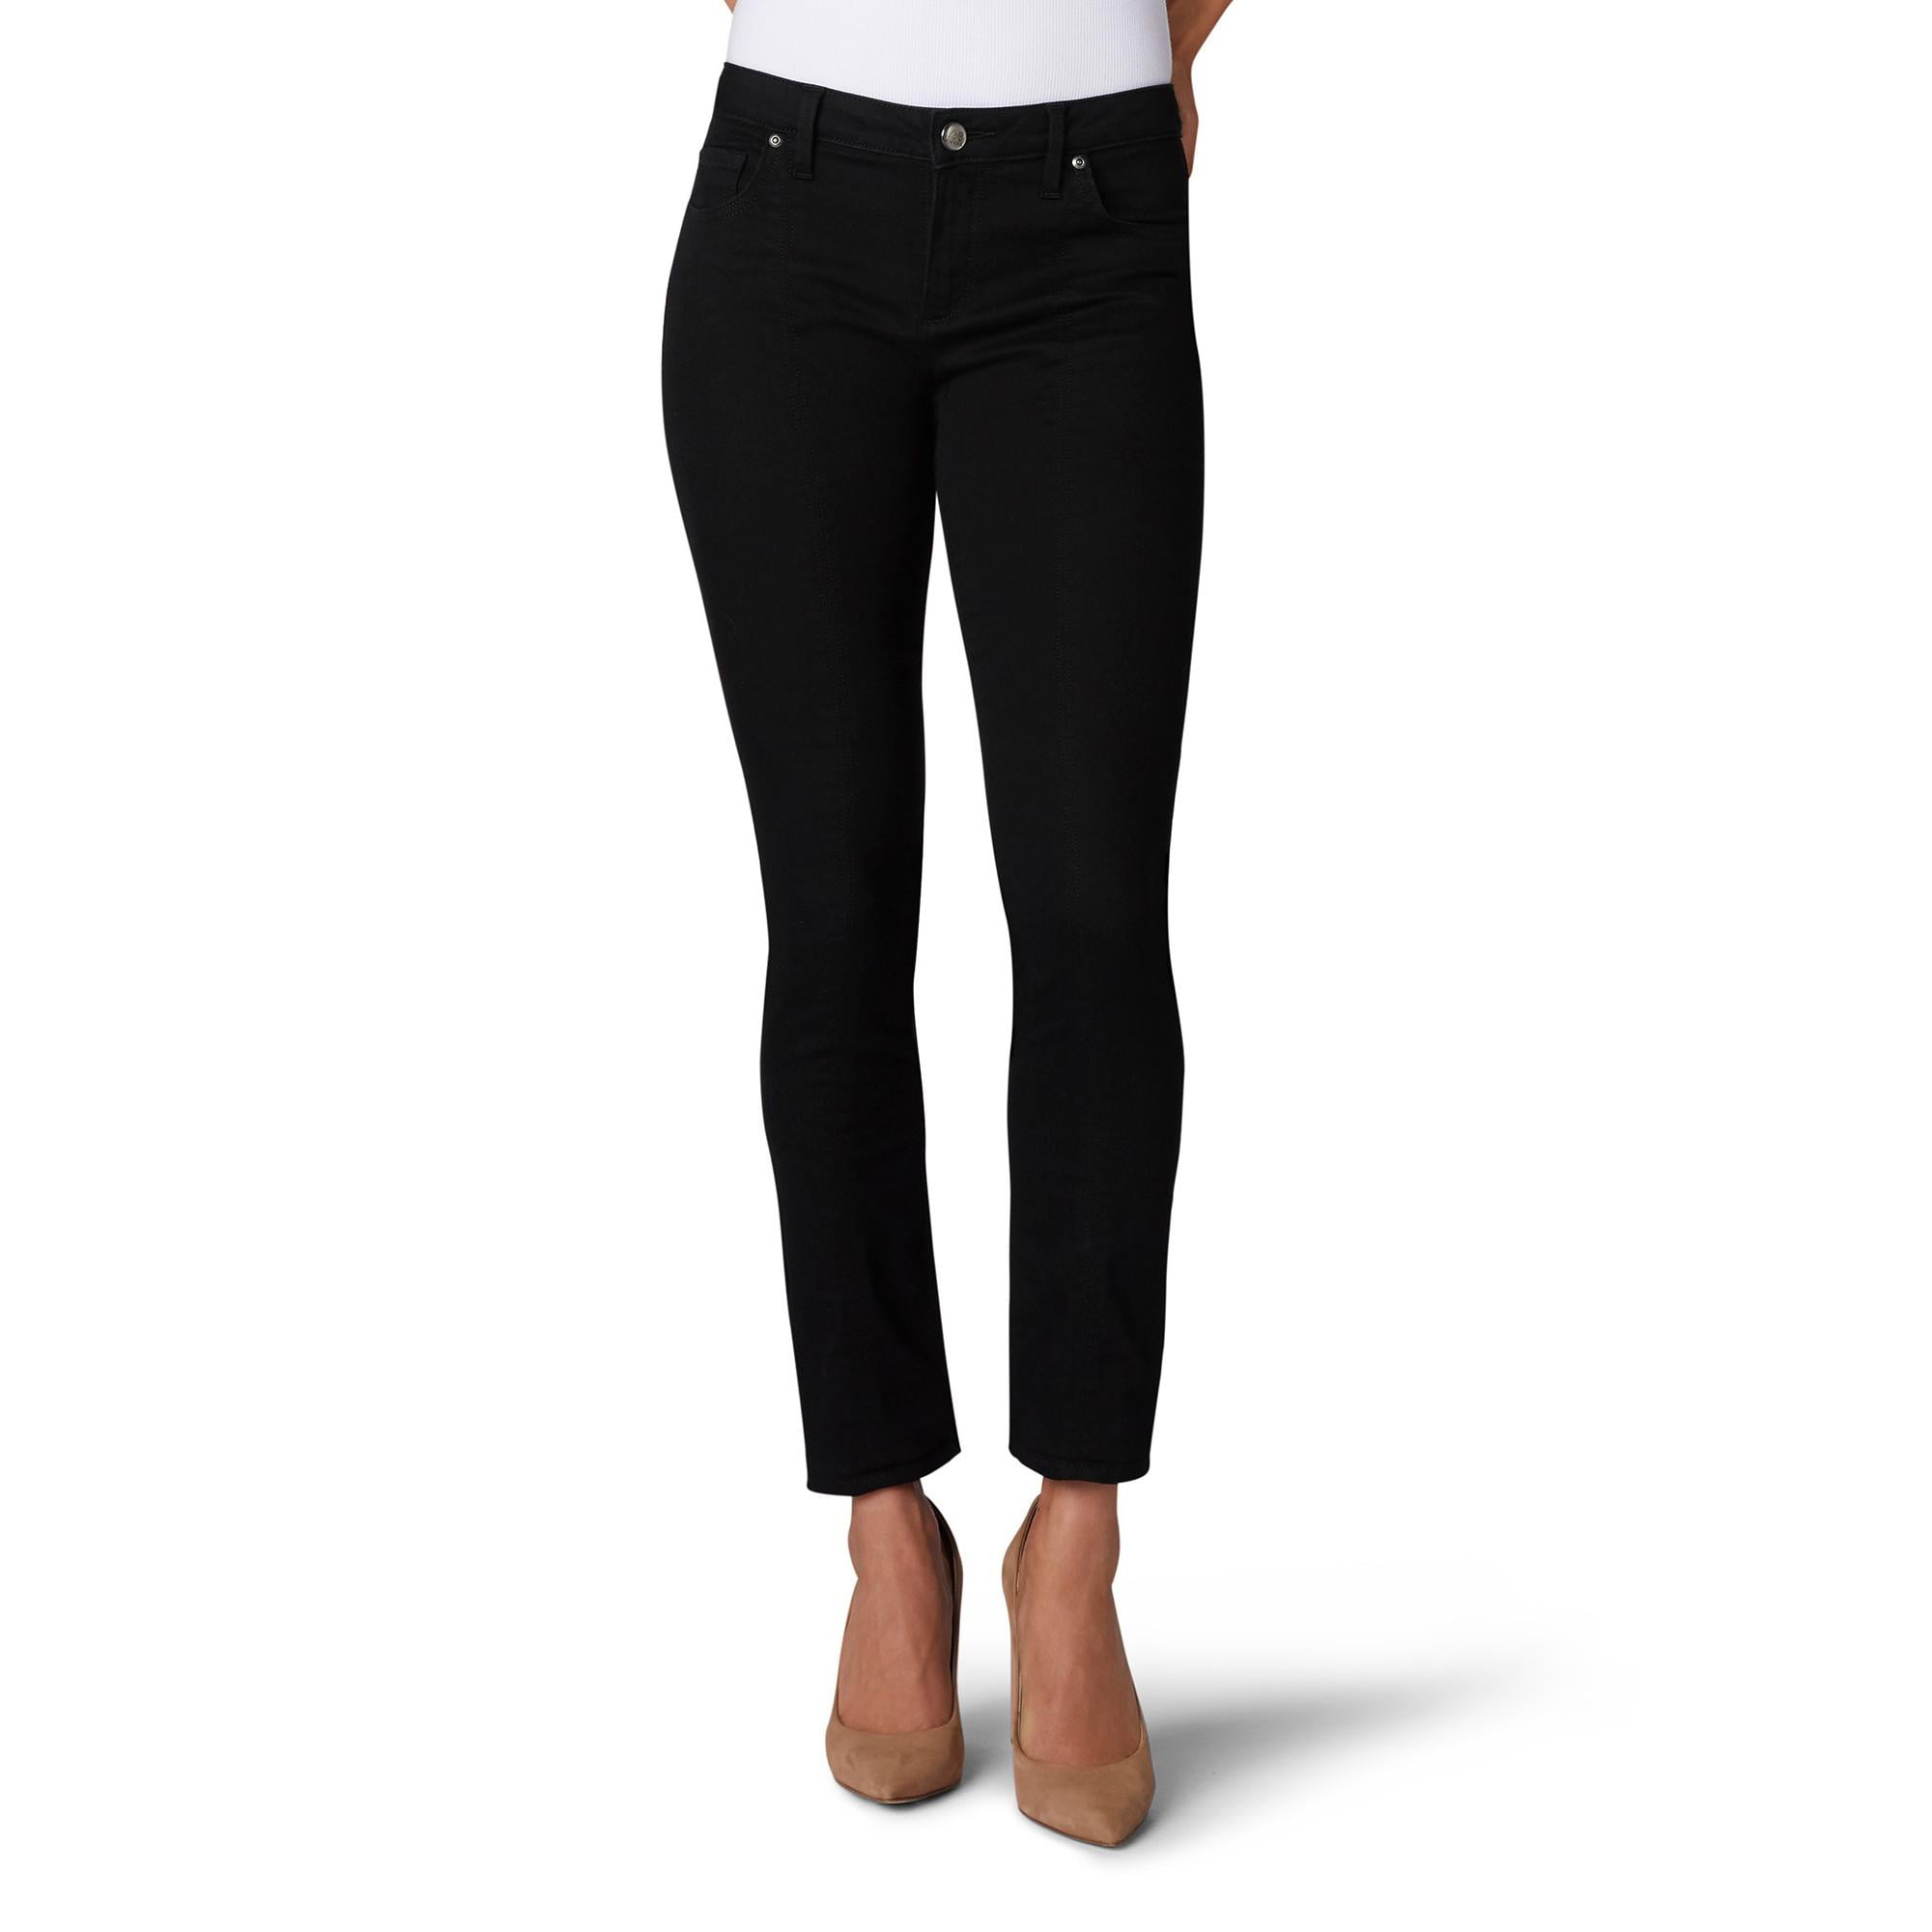 Lee Riders - Lee Riders Women's Shape Illusions Seamed Front Skinny ...